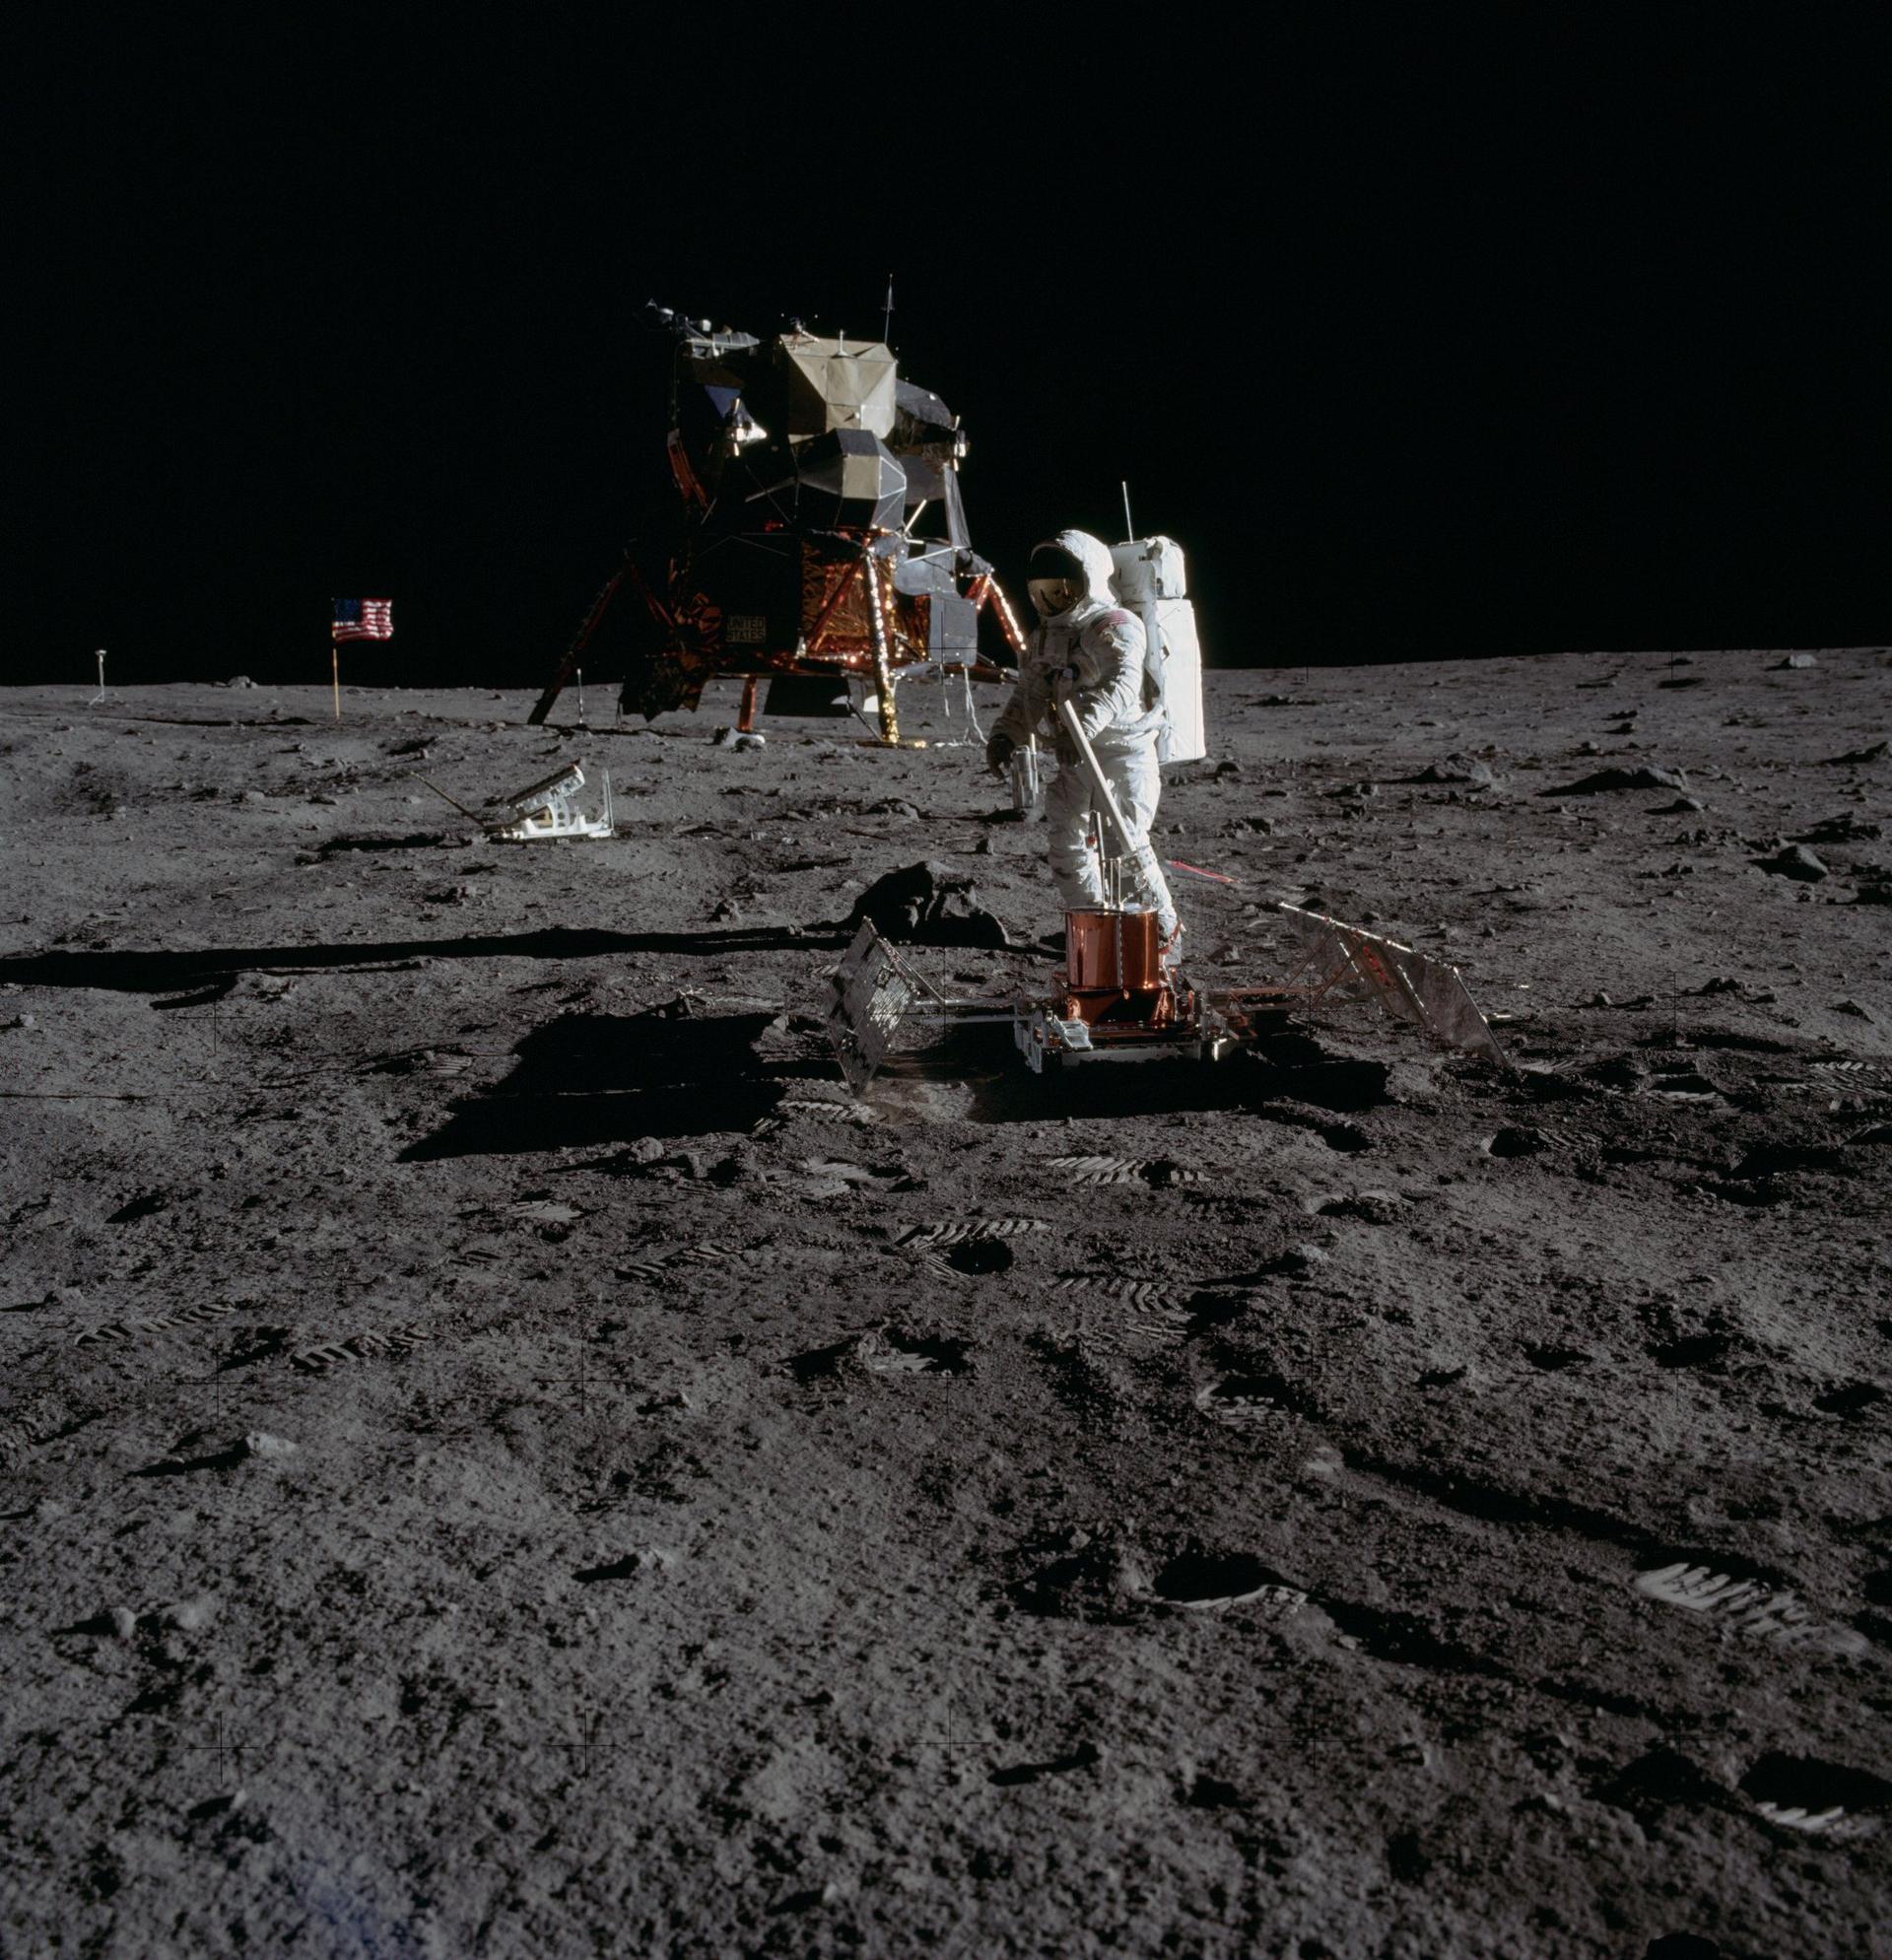 Astronaut Buzz Aldrin levels the Passive Seismic Experiments Package PSEP. Image taken at Tranquility Base during the Apollo 11 Mission. Credit: NASA